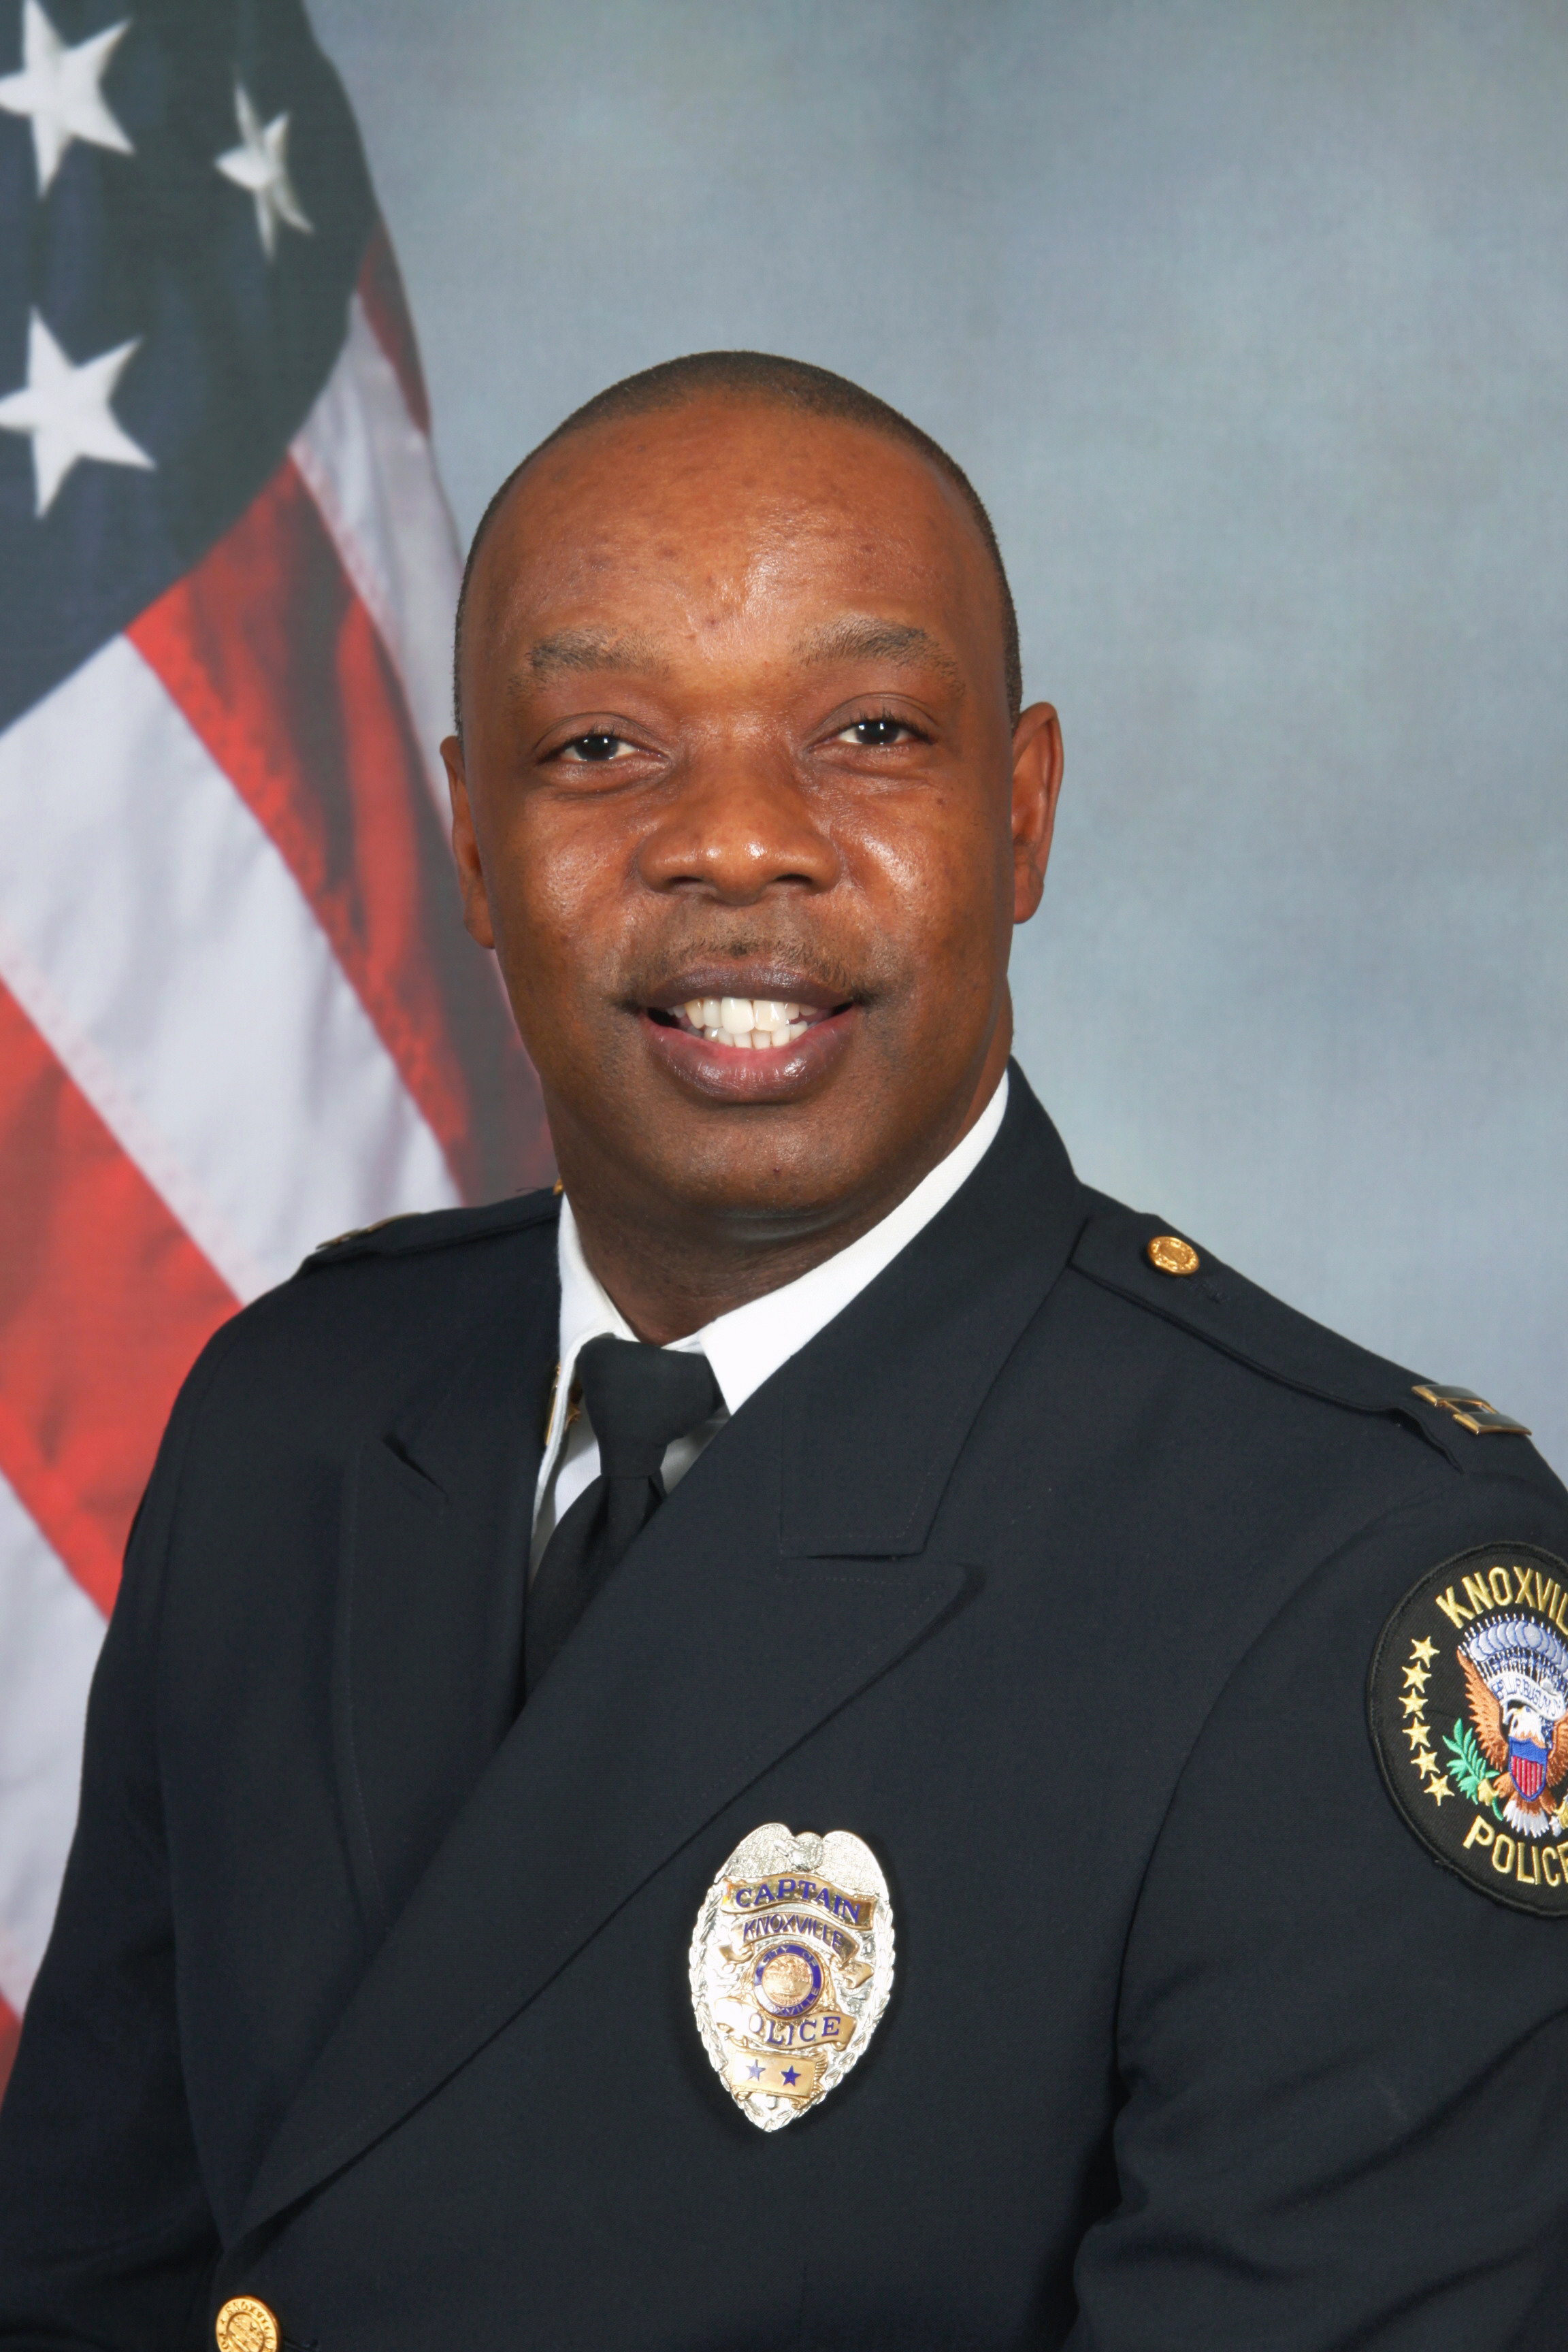 Knoxville Police name 1st African-American deputy chief | wbir.com